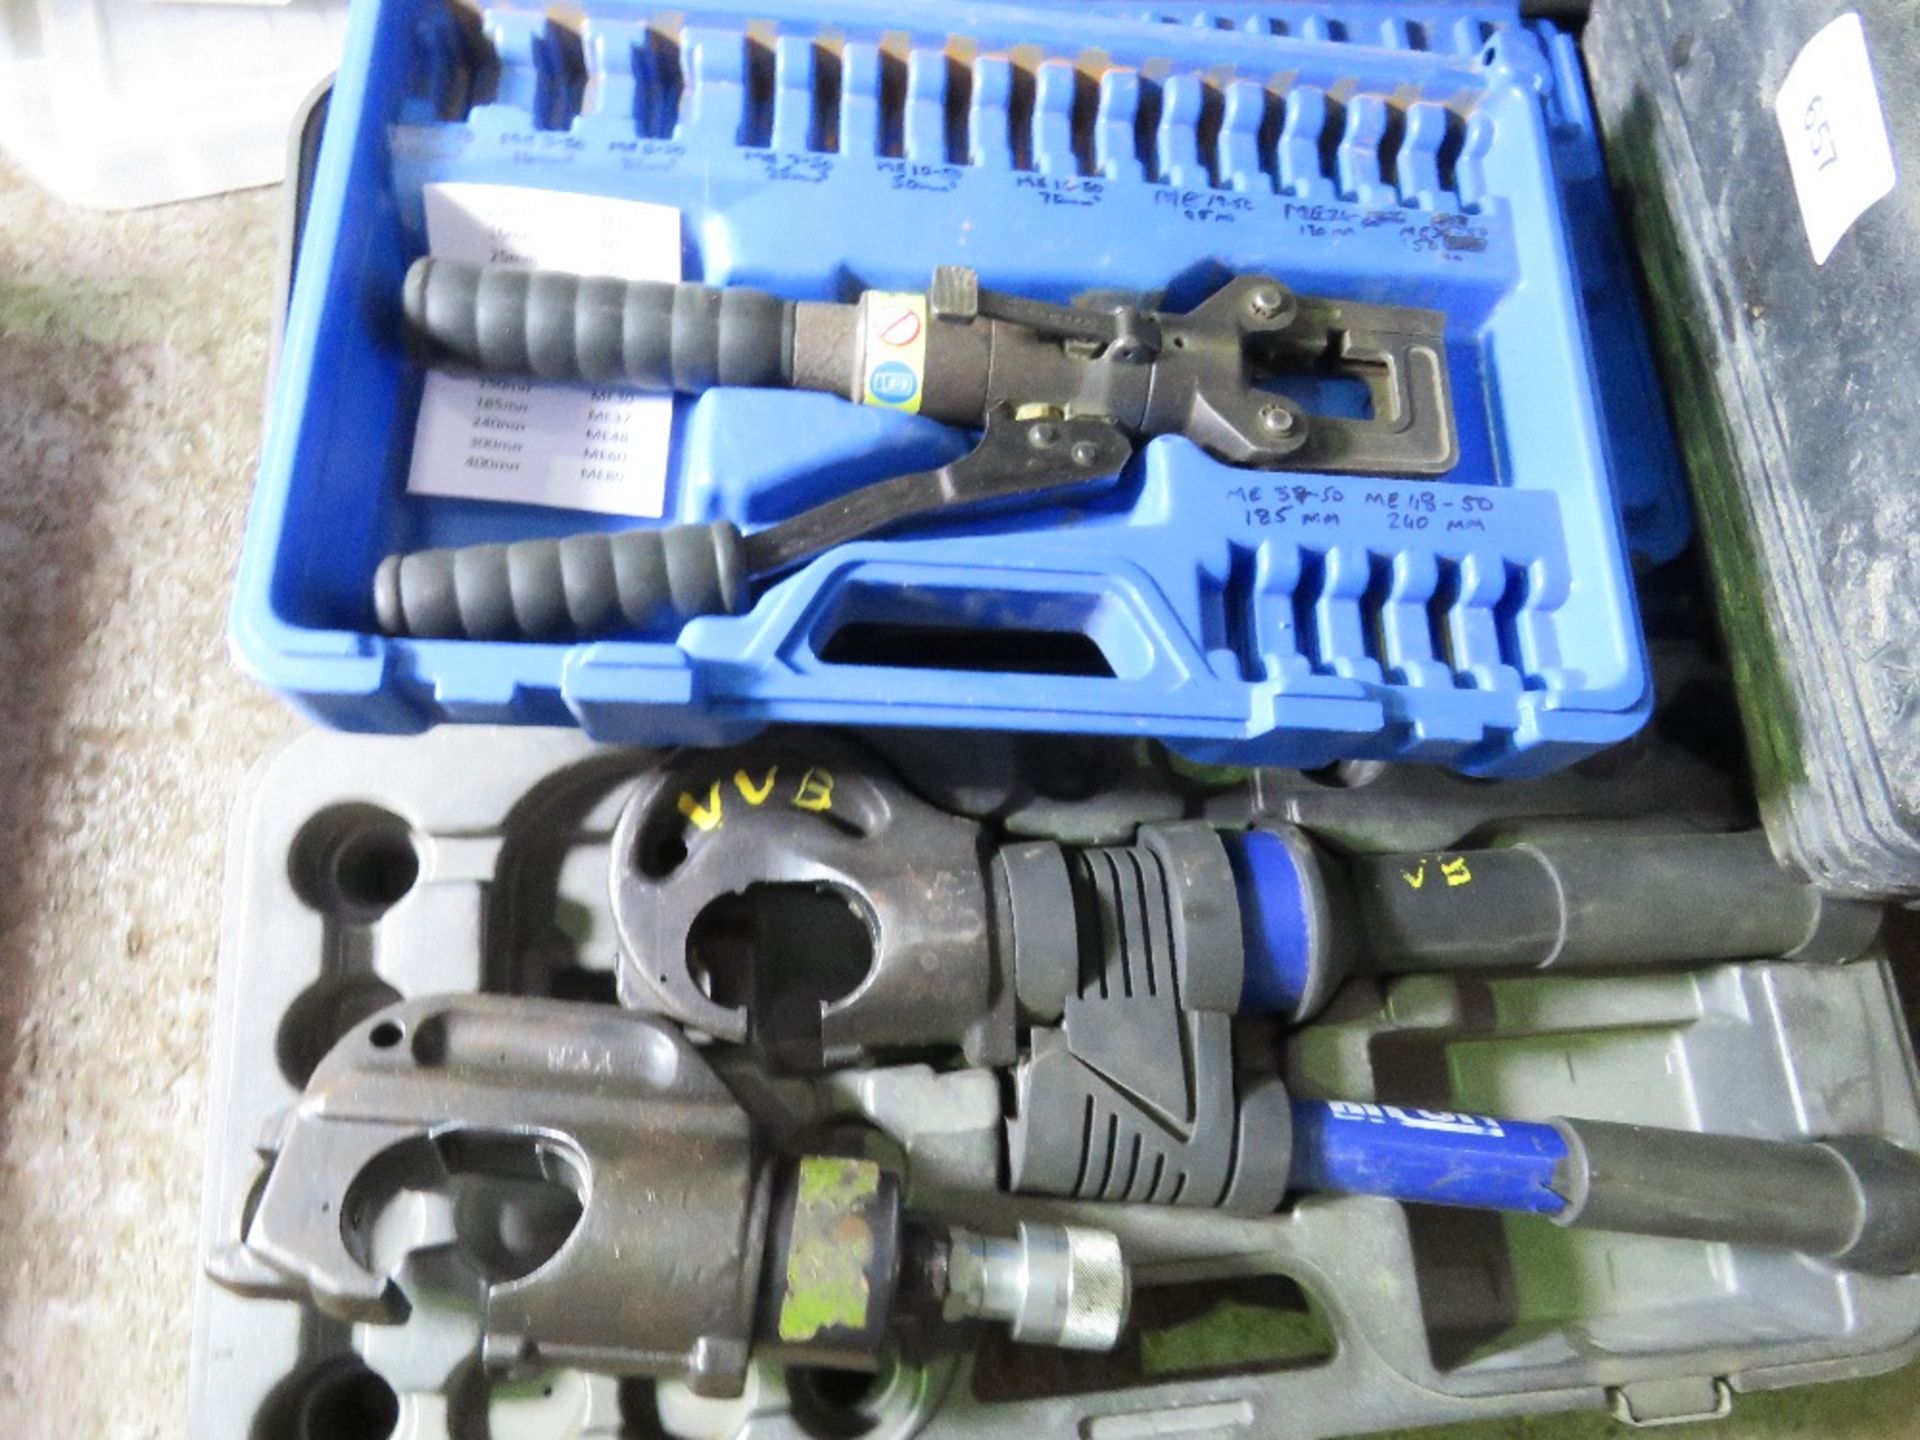 2 X CRIMPING PLIERS PLUS A HYDRAULIC CRIMPING HEAD. - Image 2 of 3